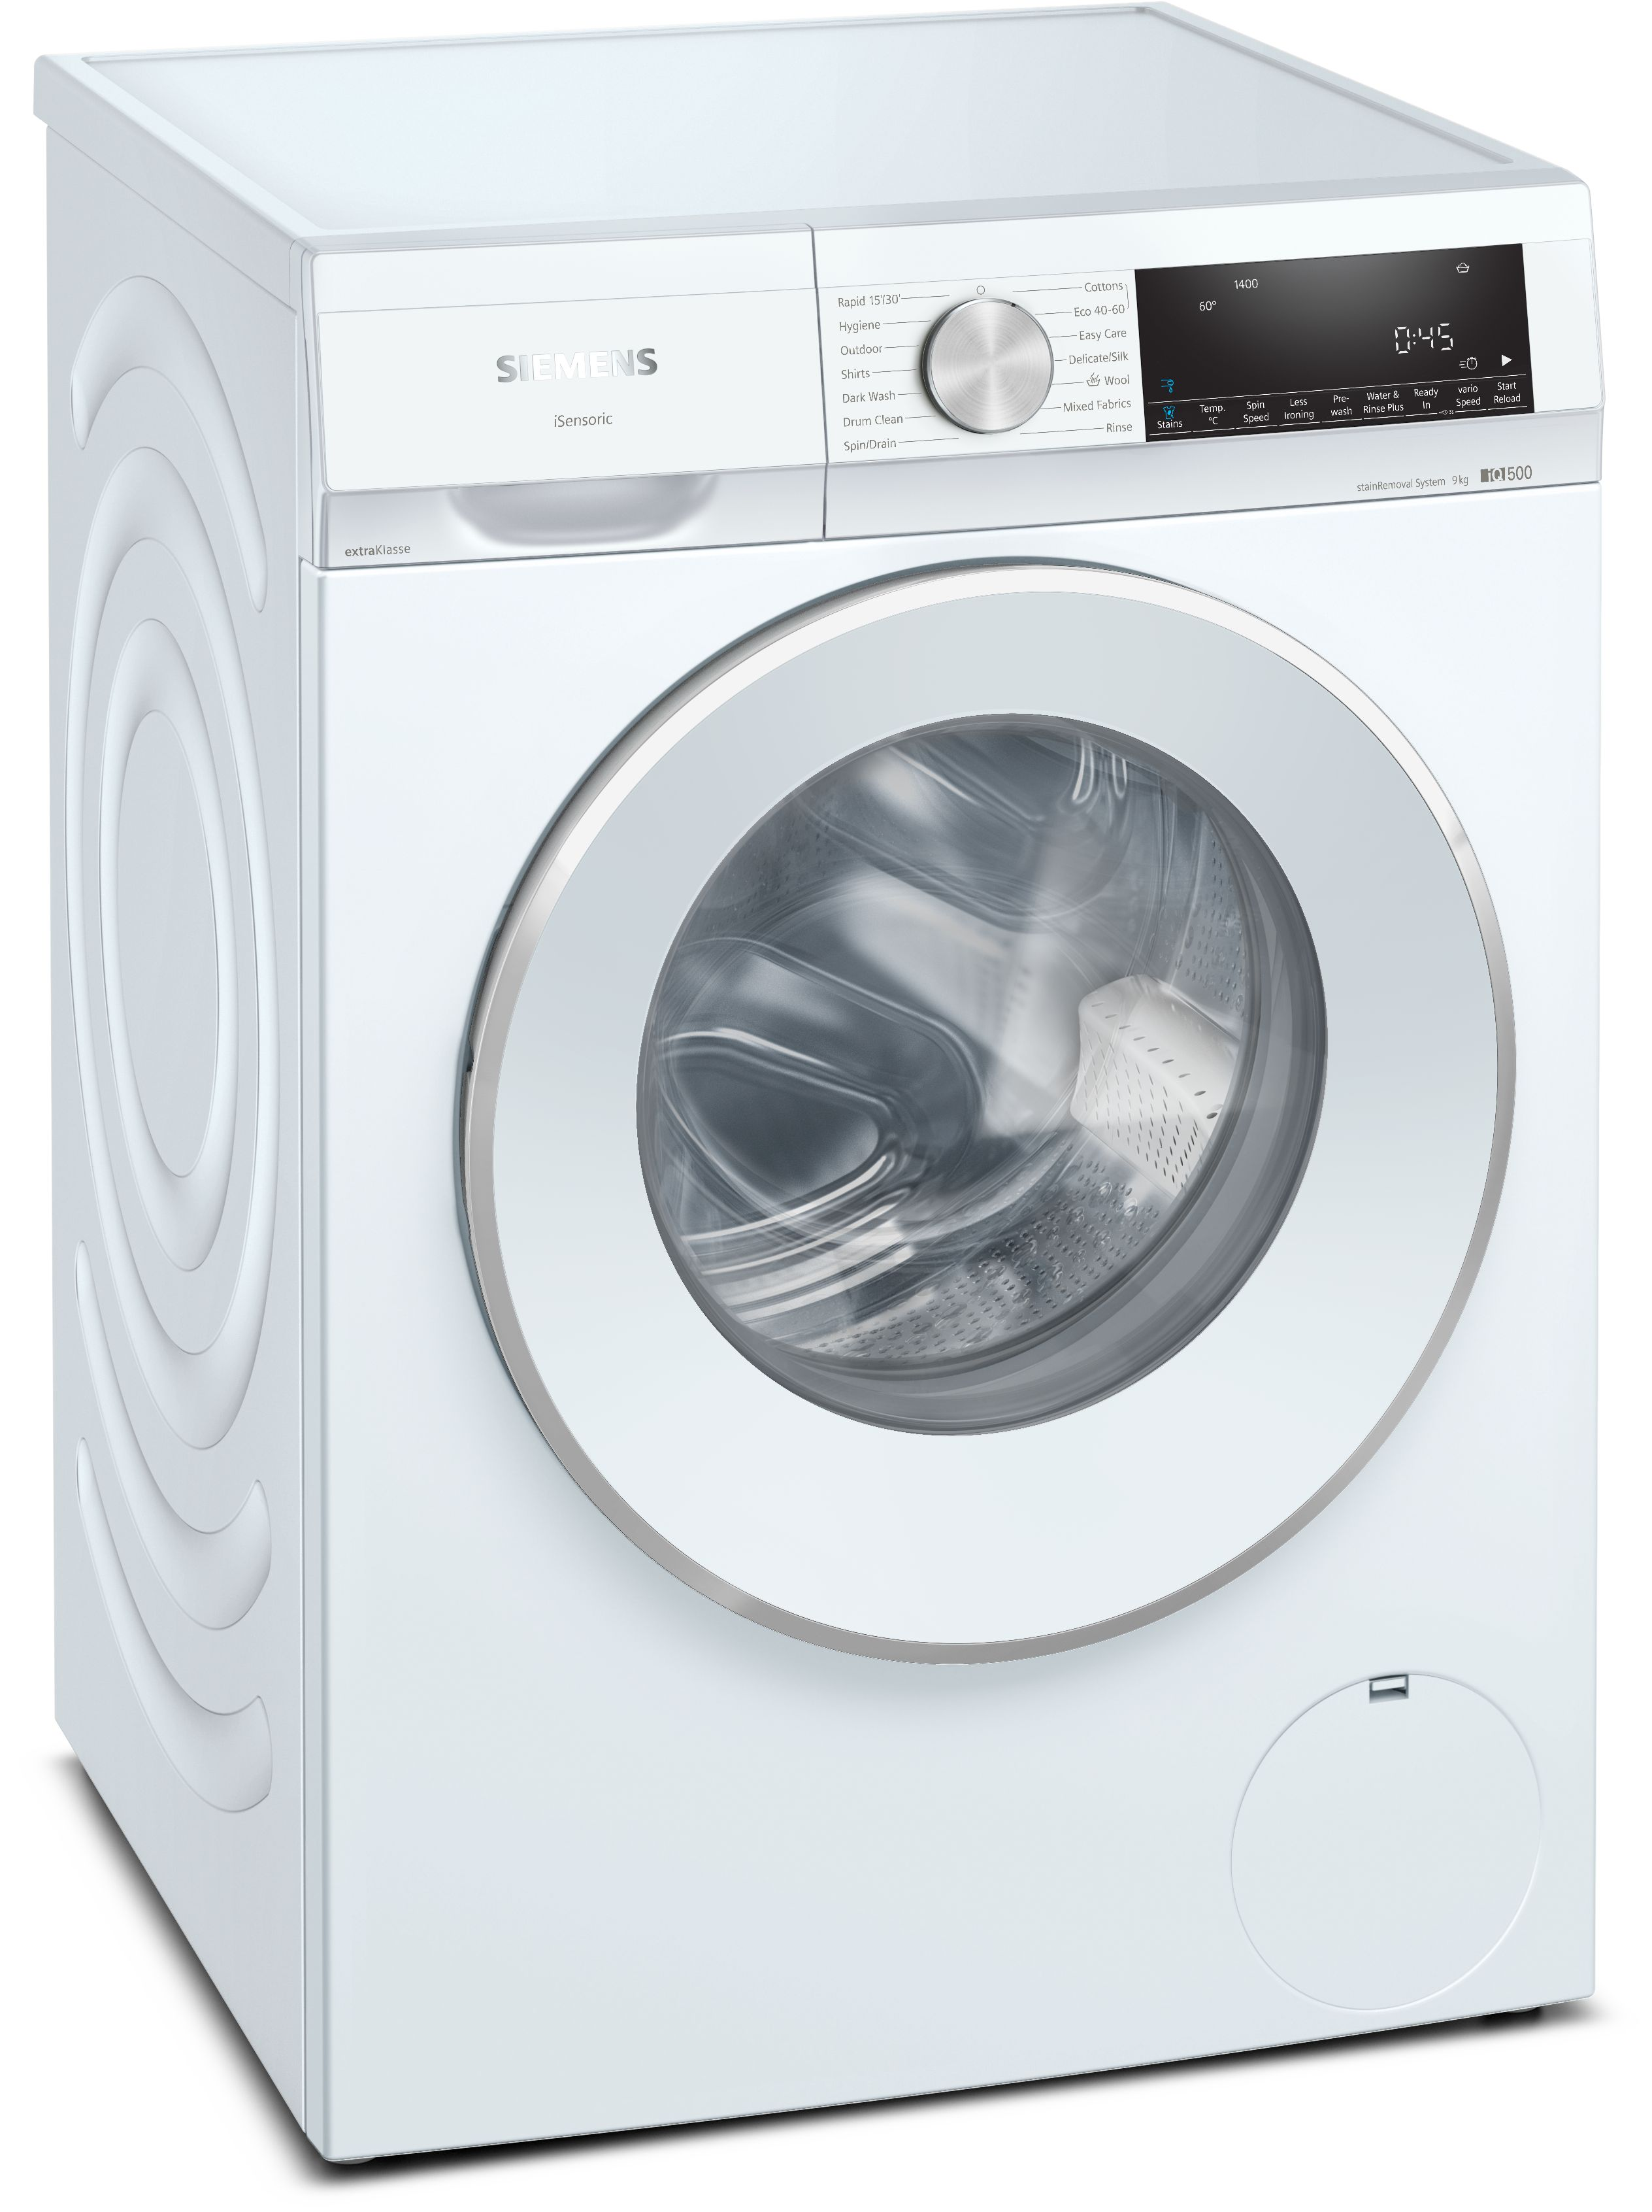 WG44G209GB SIEMENS extraKlasse Freestanding Washing Machine - 9Kg/1400Spin - StainRemoval - IQDrive - VarioSpeed - LED Display - A Energy - White with Silver/White Door 
RWD15